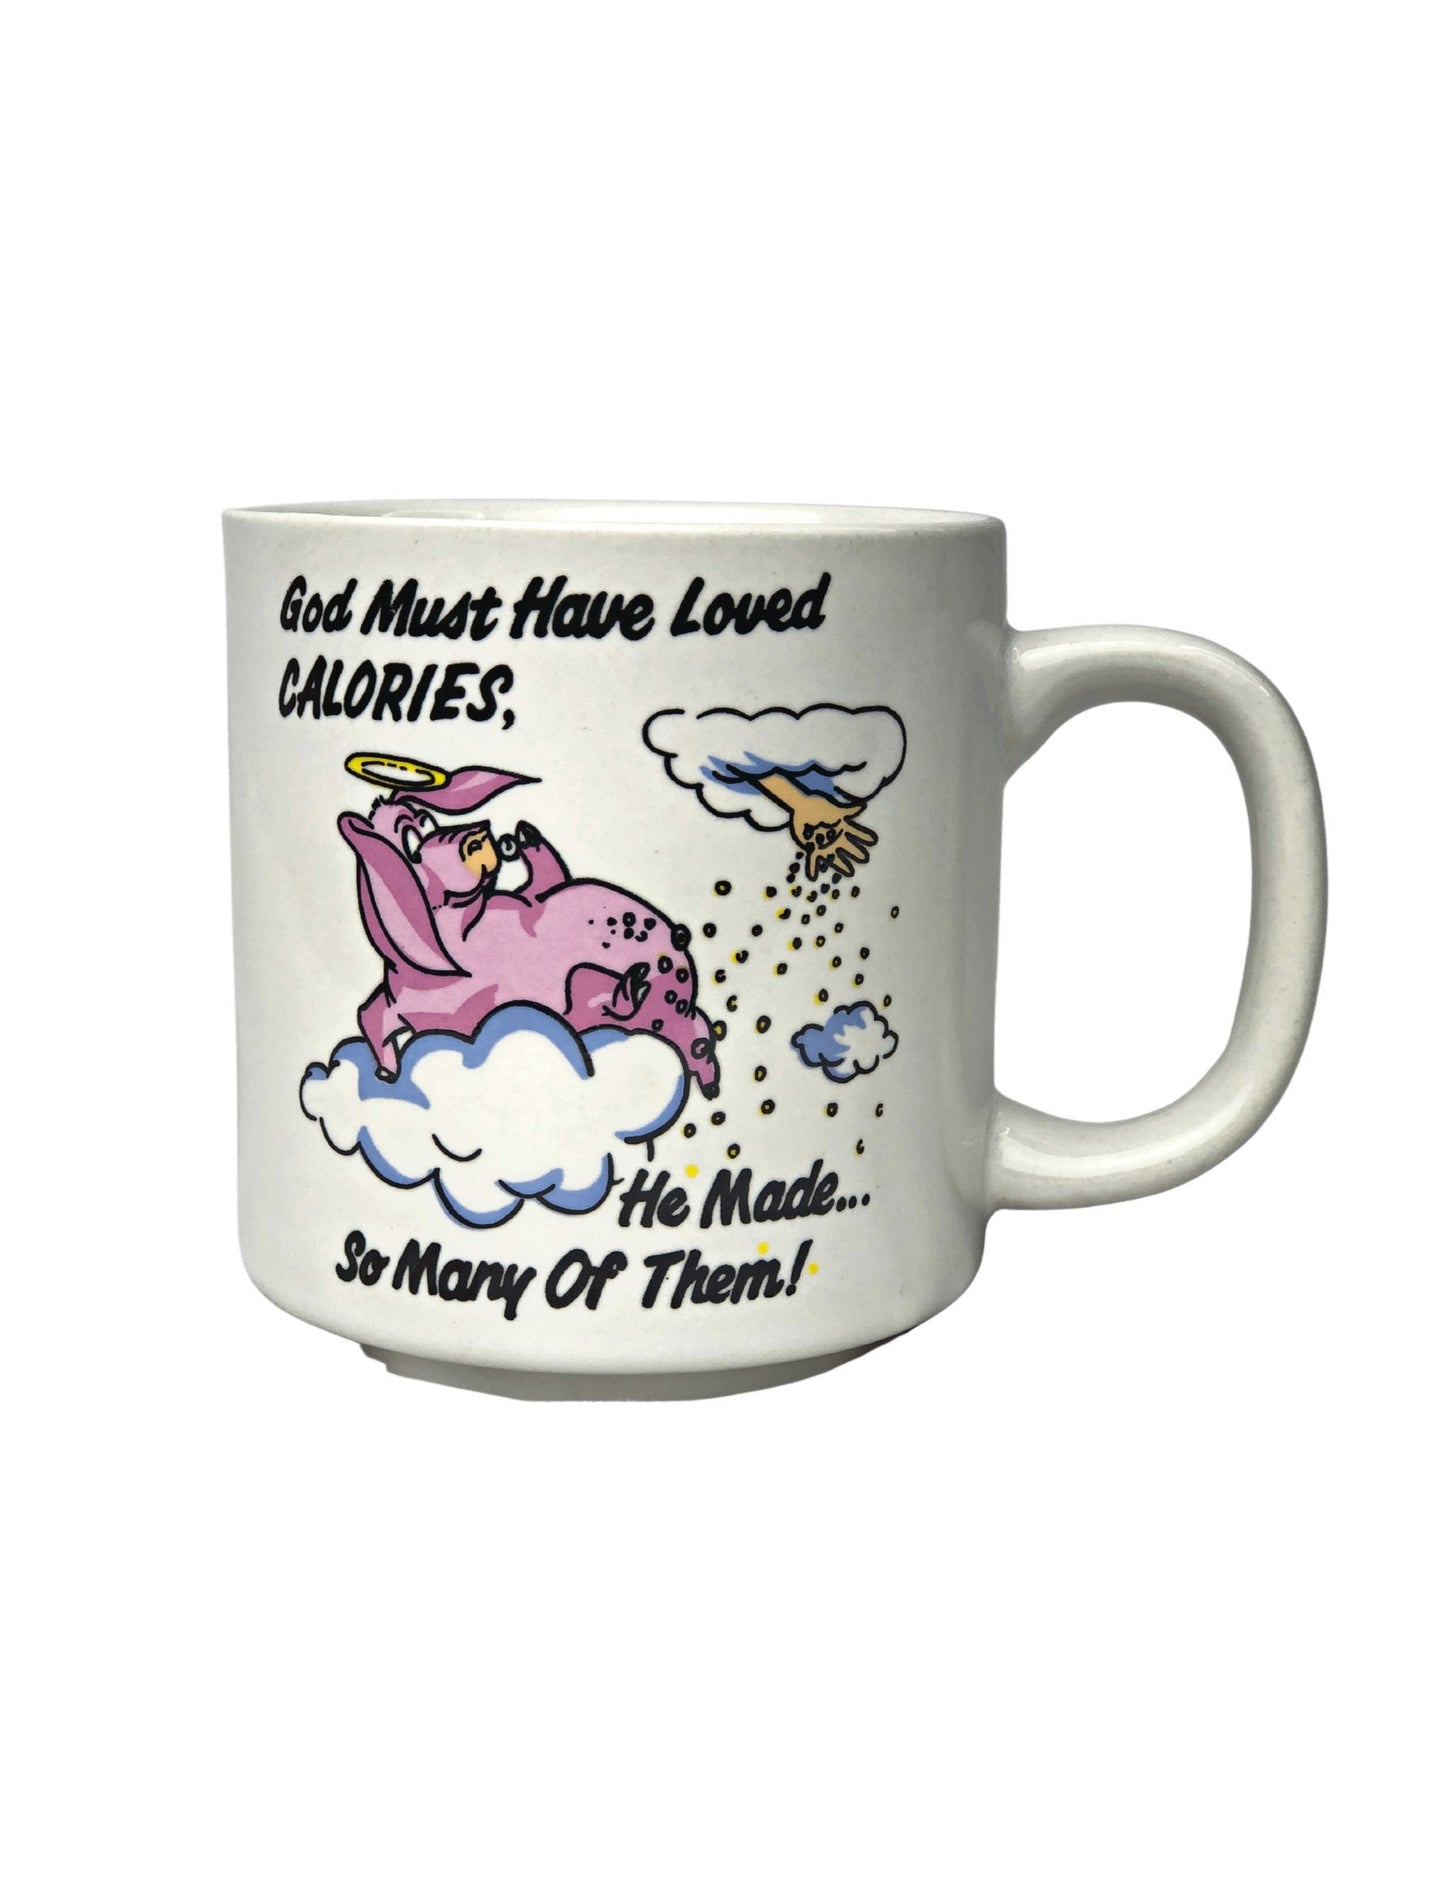 80’s God Must Have Loved Calories, He Made So Many of Them! Funny Coffee Mug